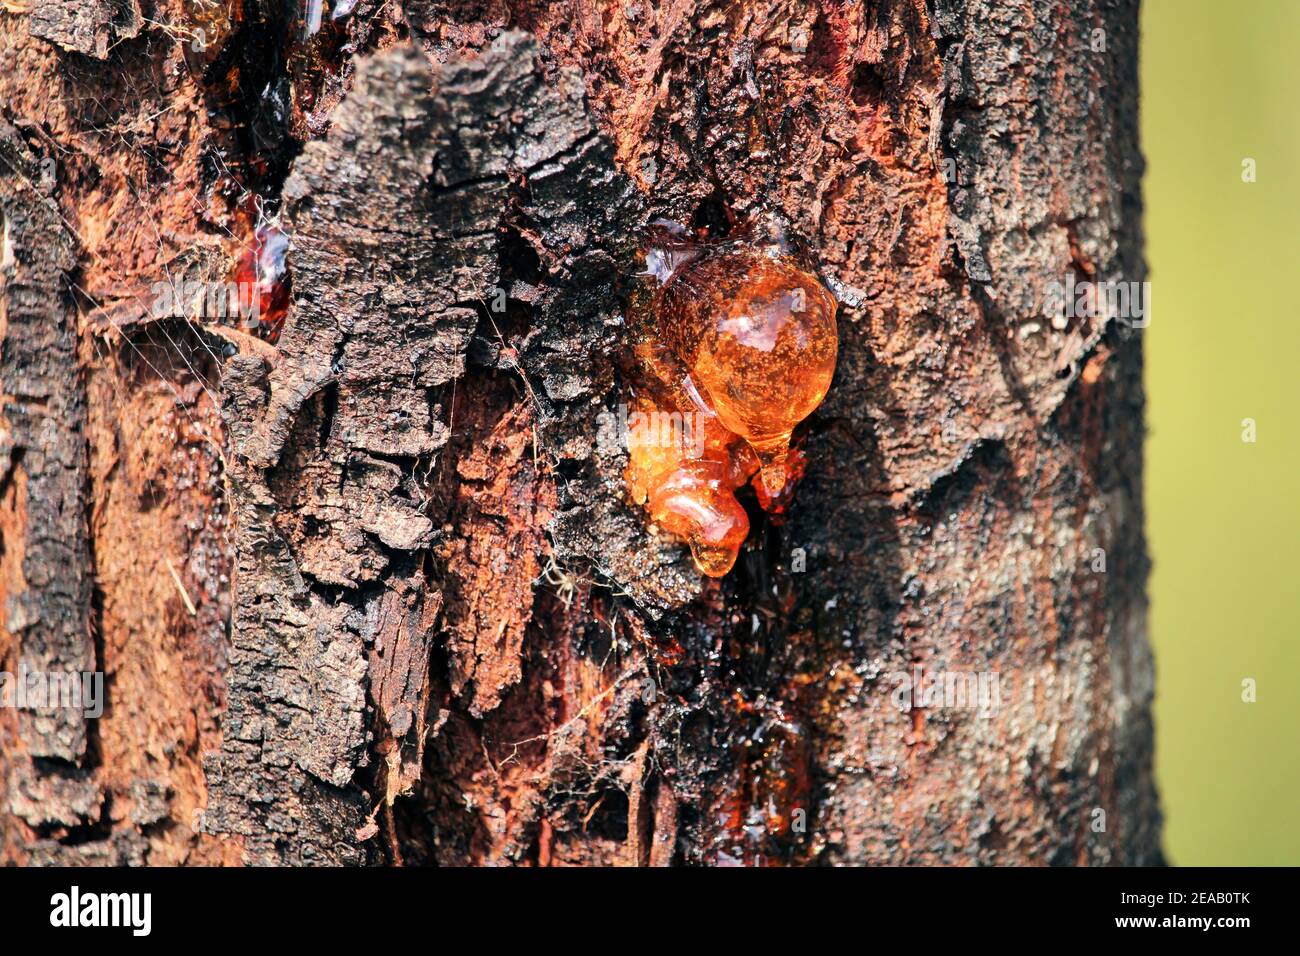 Close-up of gum exuding from Acacia tree trunk due to stress, South Australia Stock Photo